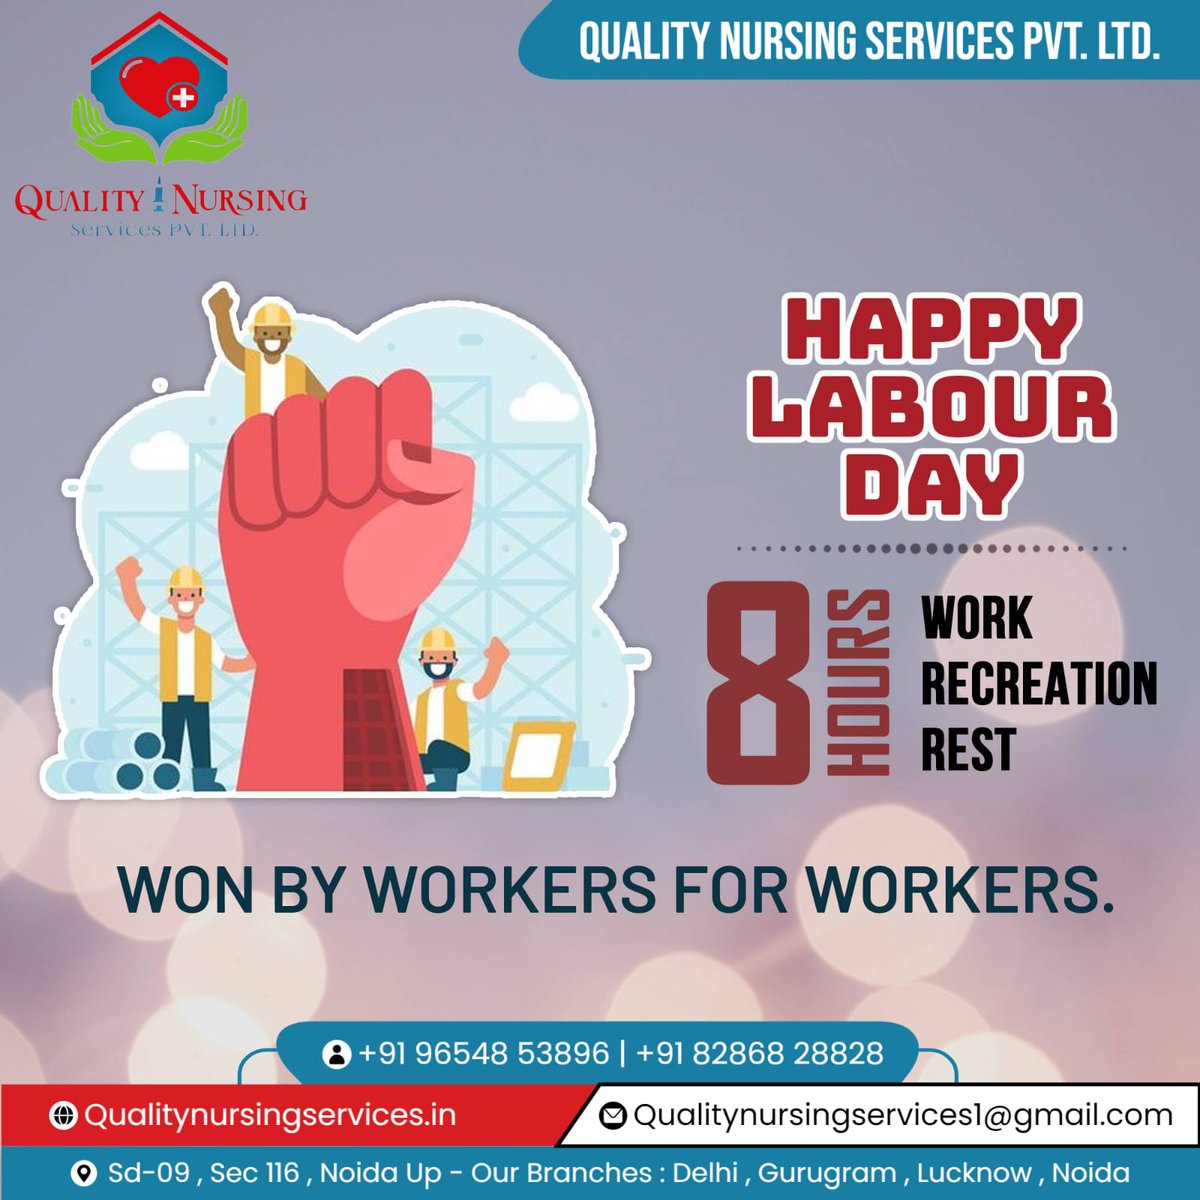 🌟Let's honor the unsung heroes of healthcare this World Labour Day – our dedicated nurses!

828-6-828-828
qualityelderhomes@gmail.com
qualityelderhomes.com

#NursingHeroes #LabourDay2024
#NursingHeroes #HealthcareHeroes
#FrontlineWorkers #QualityElderHome #SupportiveCare